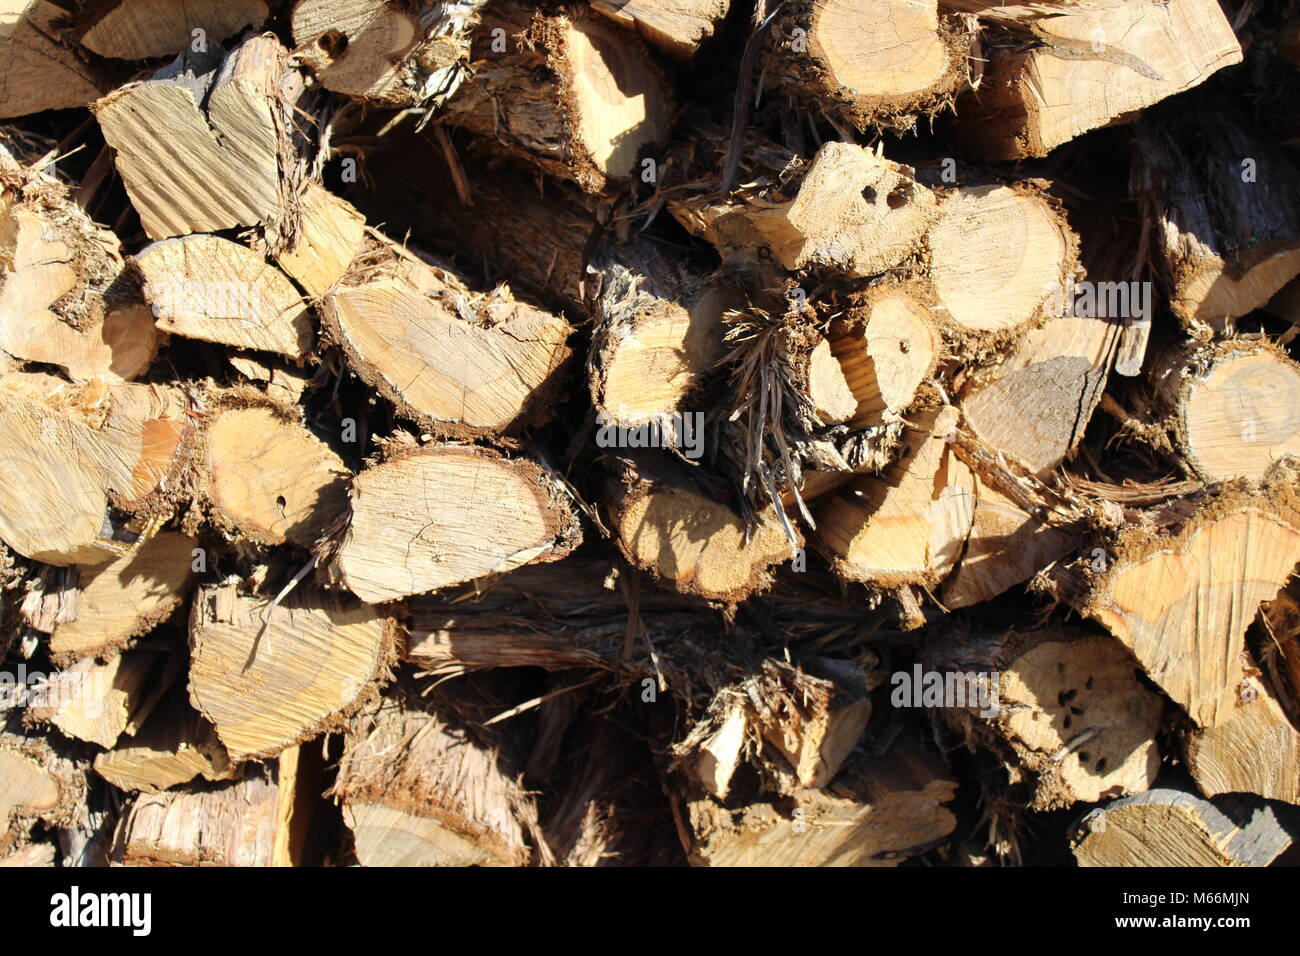 Large stack of cut fire wood close up view Stock Photo